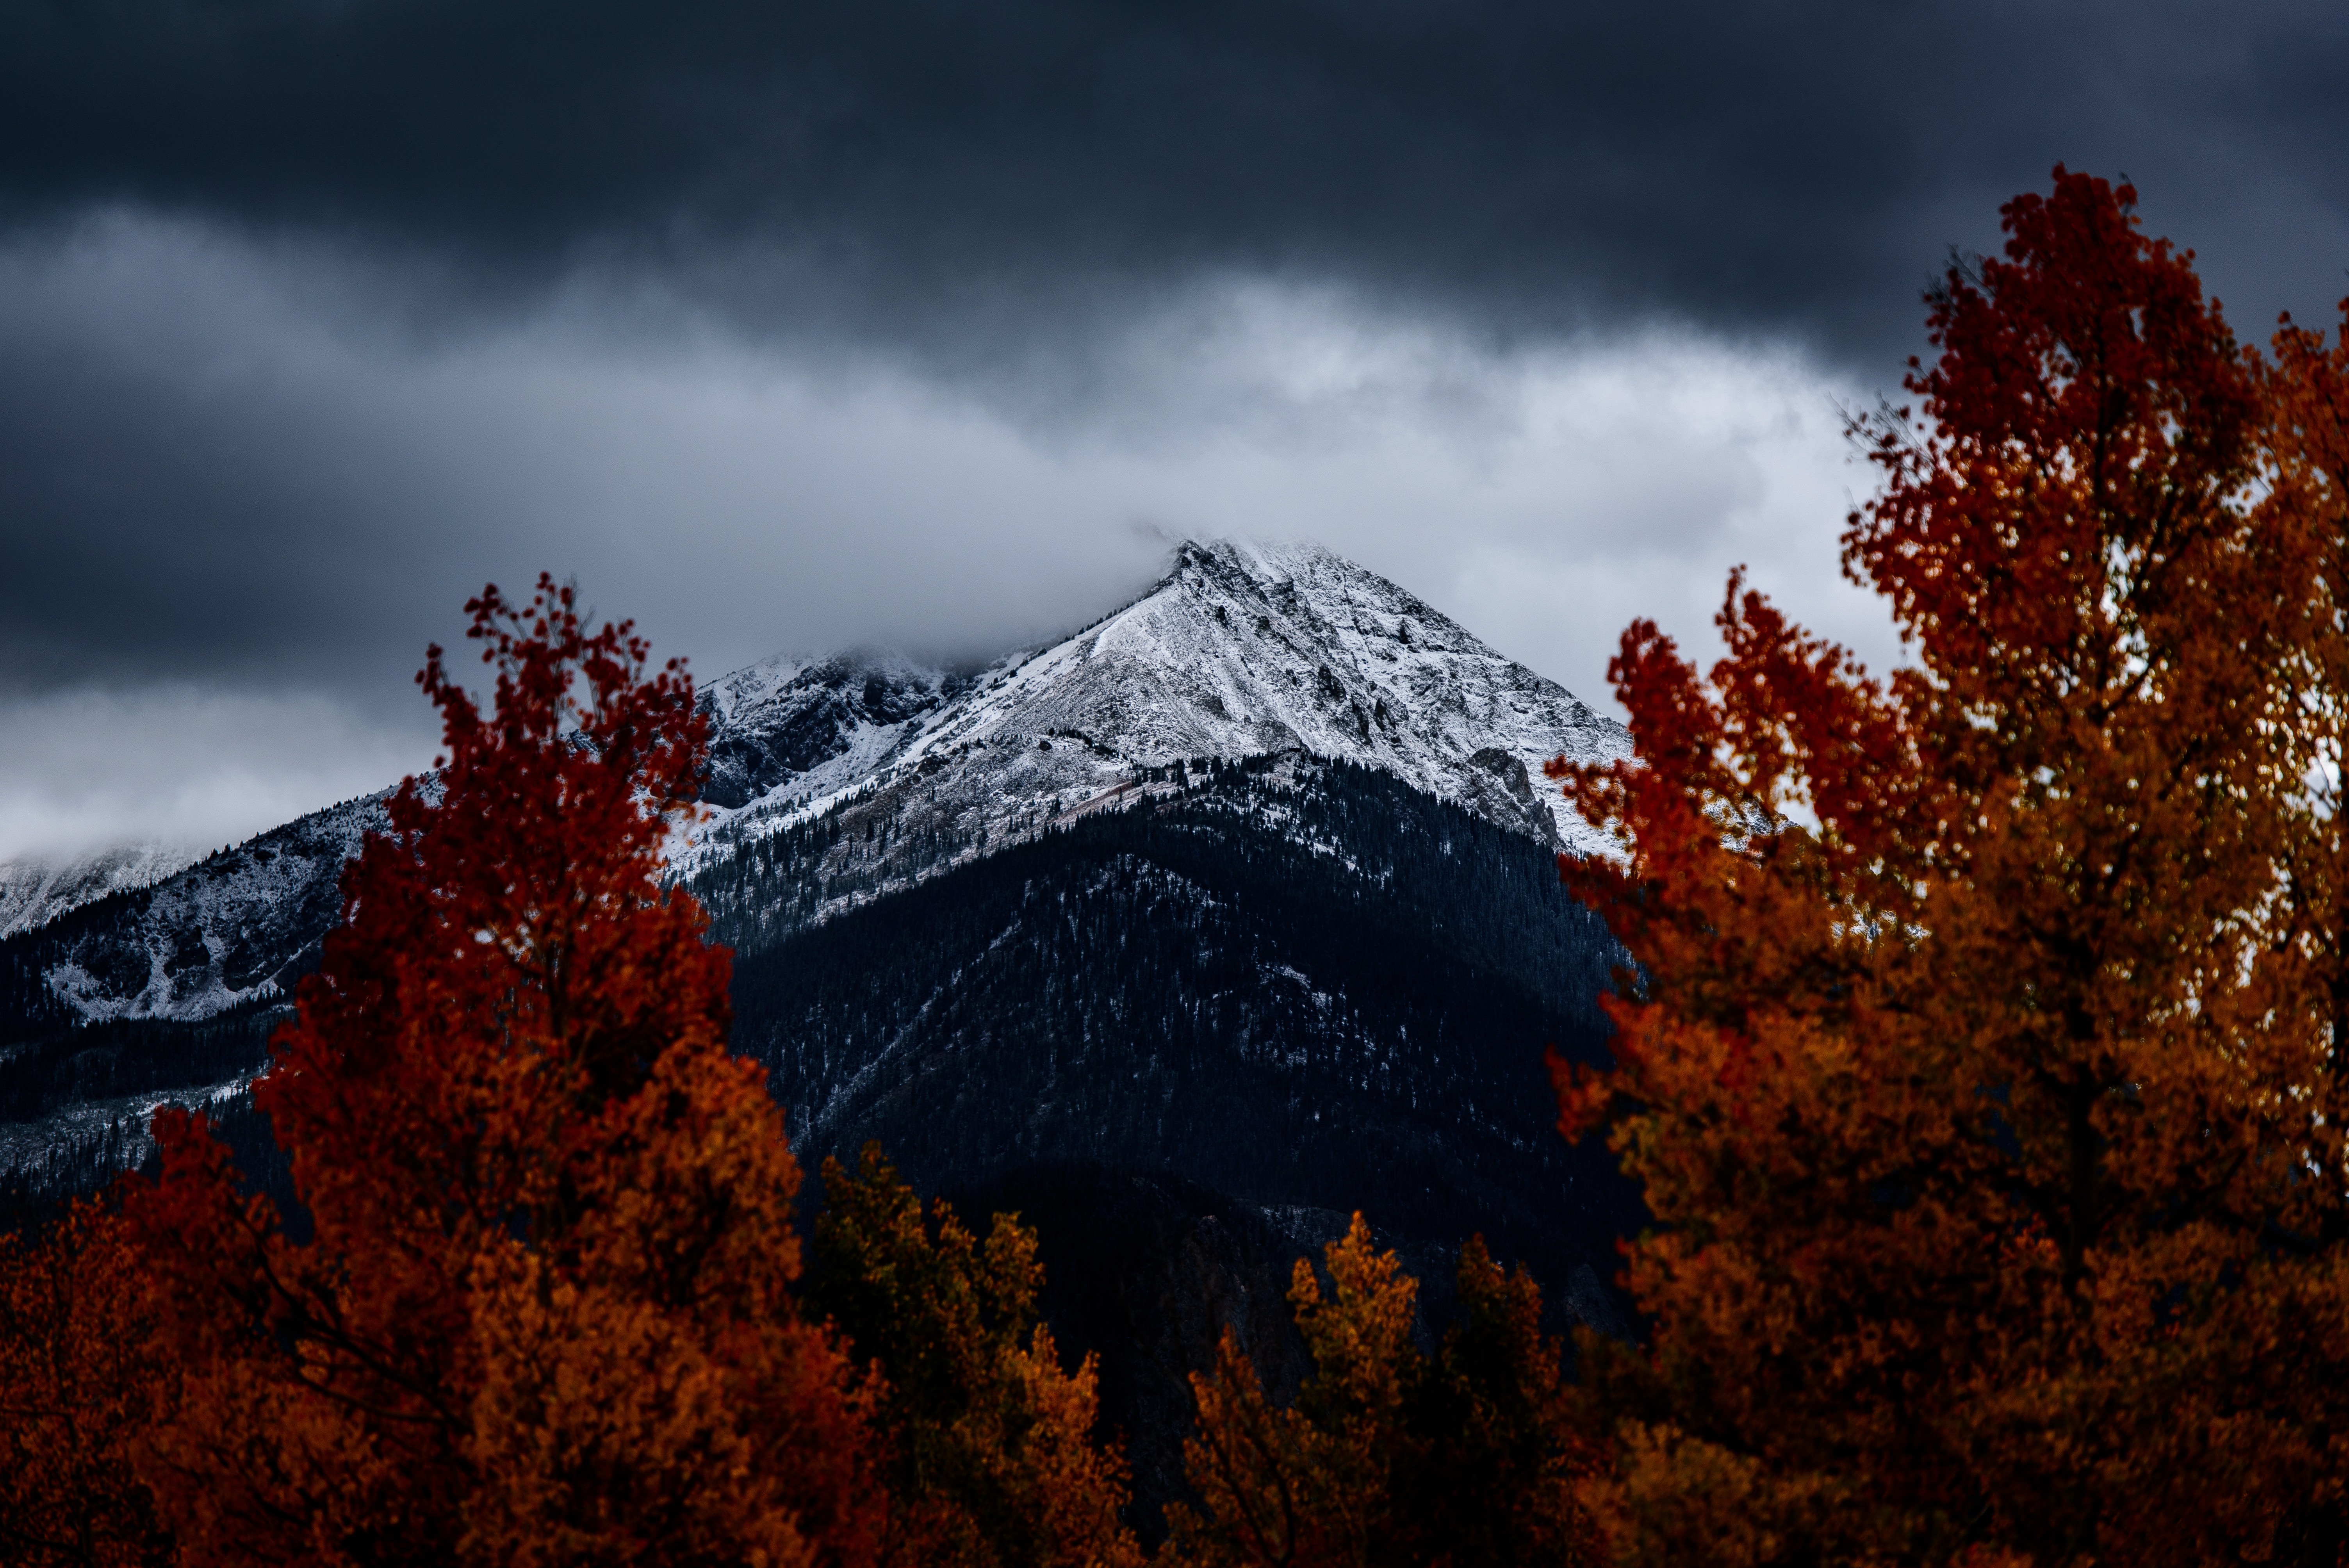 6016x4016 #white, #cloud, #tree, #through the tree, #Free picture, #mountain, #stormy, #red, #black, #cloudy, #mountain ridge, #snow, #storm, # autumn, #contrast, #fall. Mocah HD Wallpaper